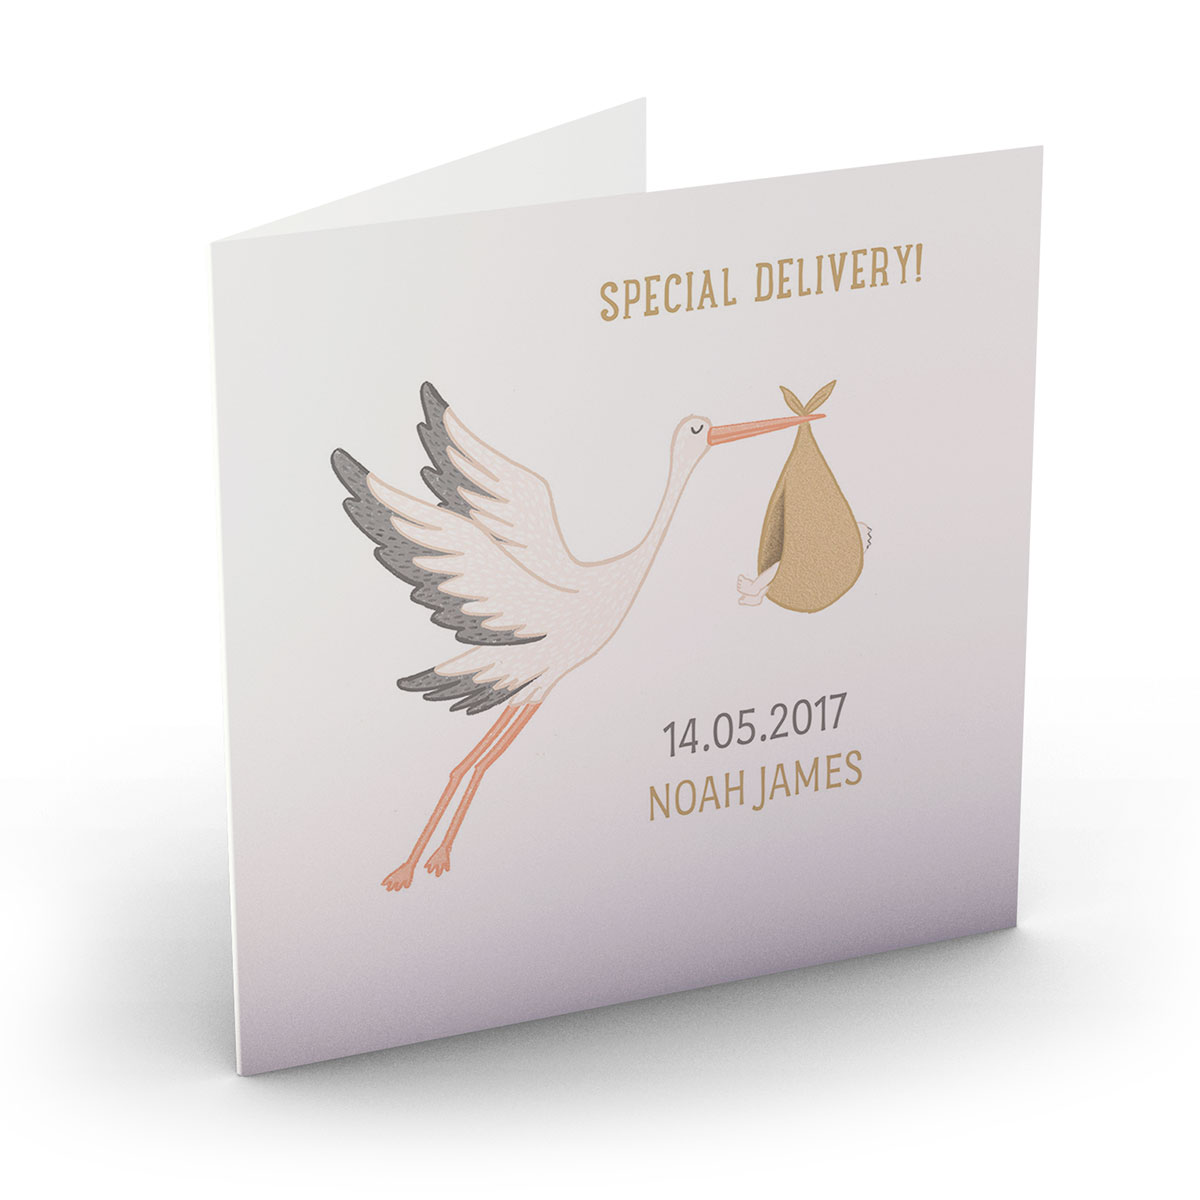 Personalised New Baby Card - Special Delivery Stork